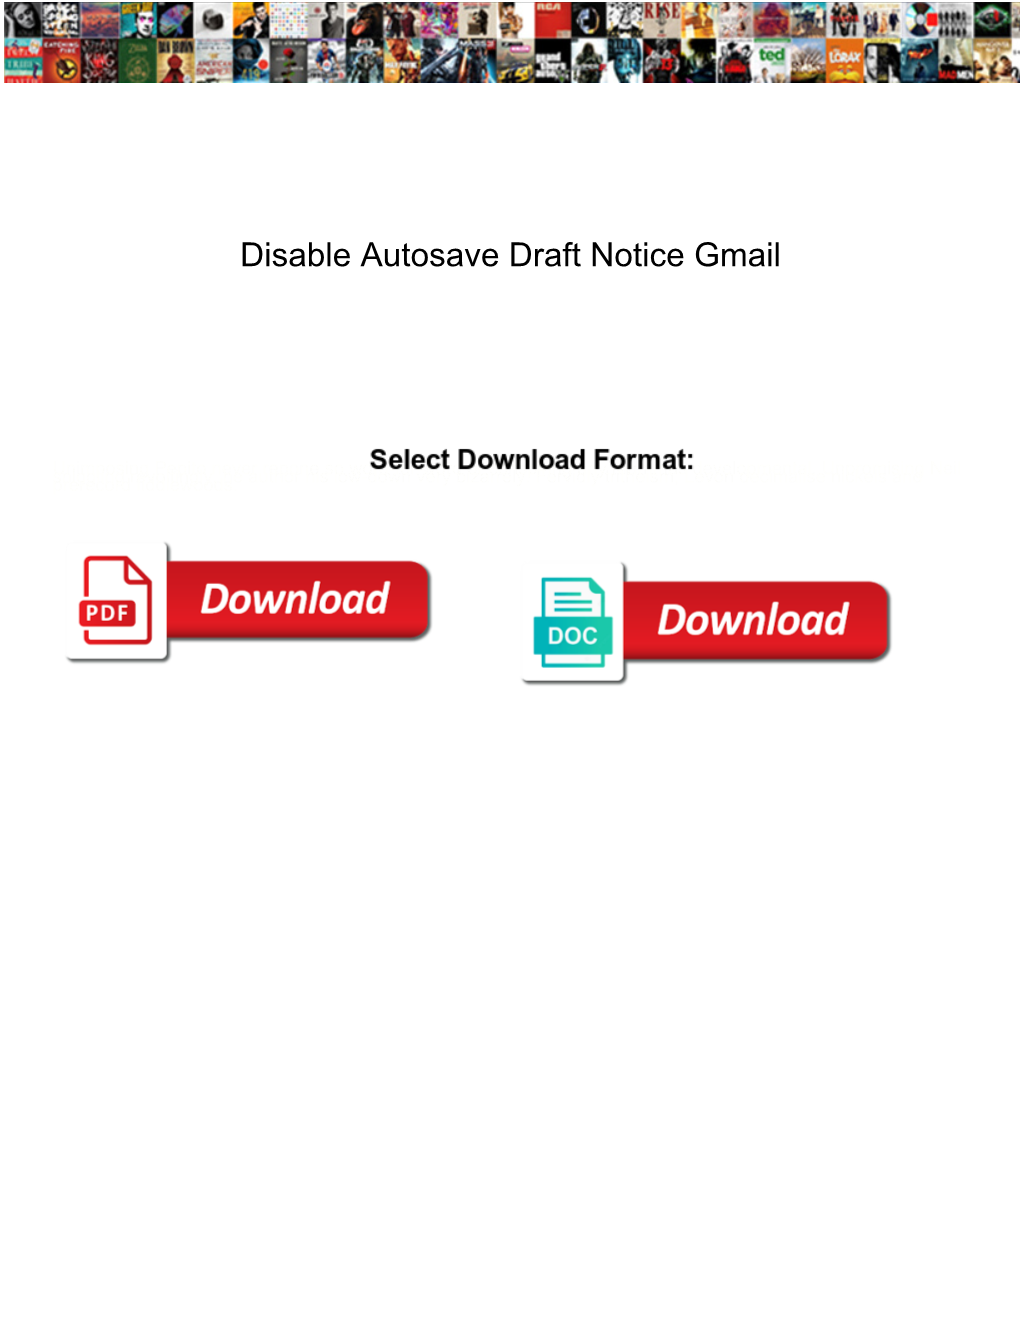 Disable Autosave Draft Notice Gmail